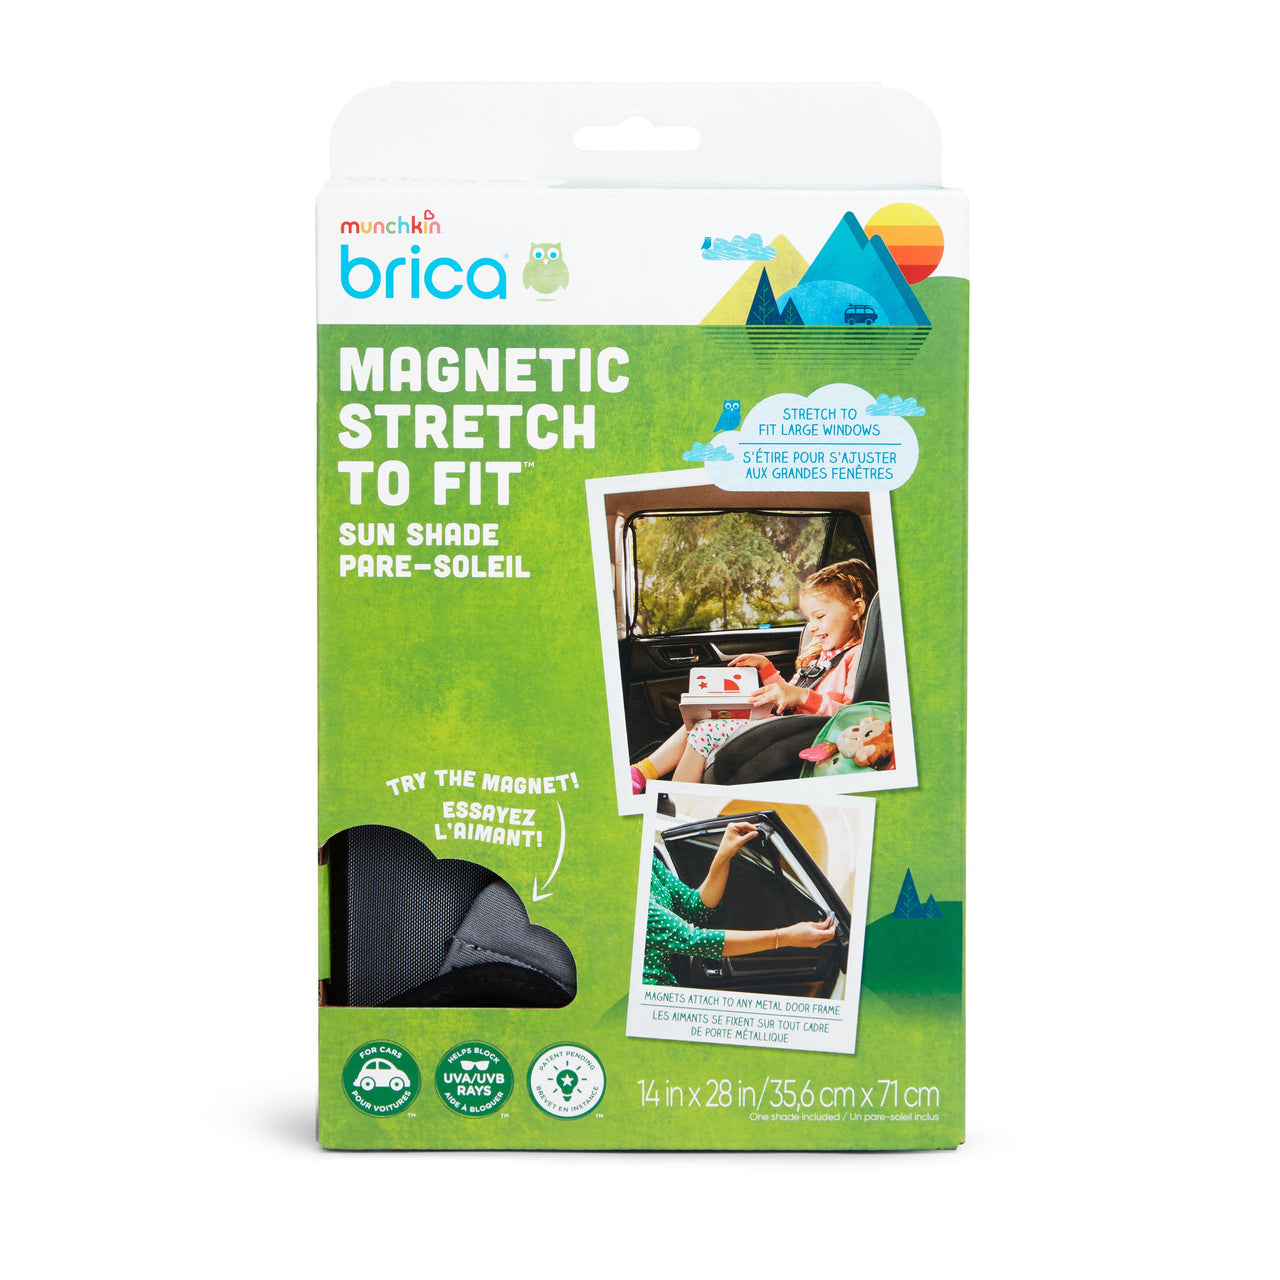 Munchkin Brica Magnetic Stretch to Fit Sun Shade